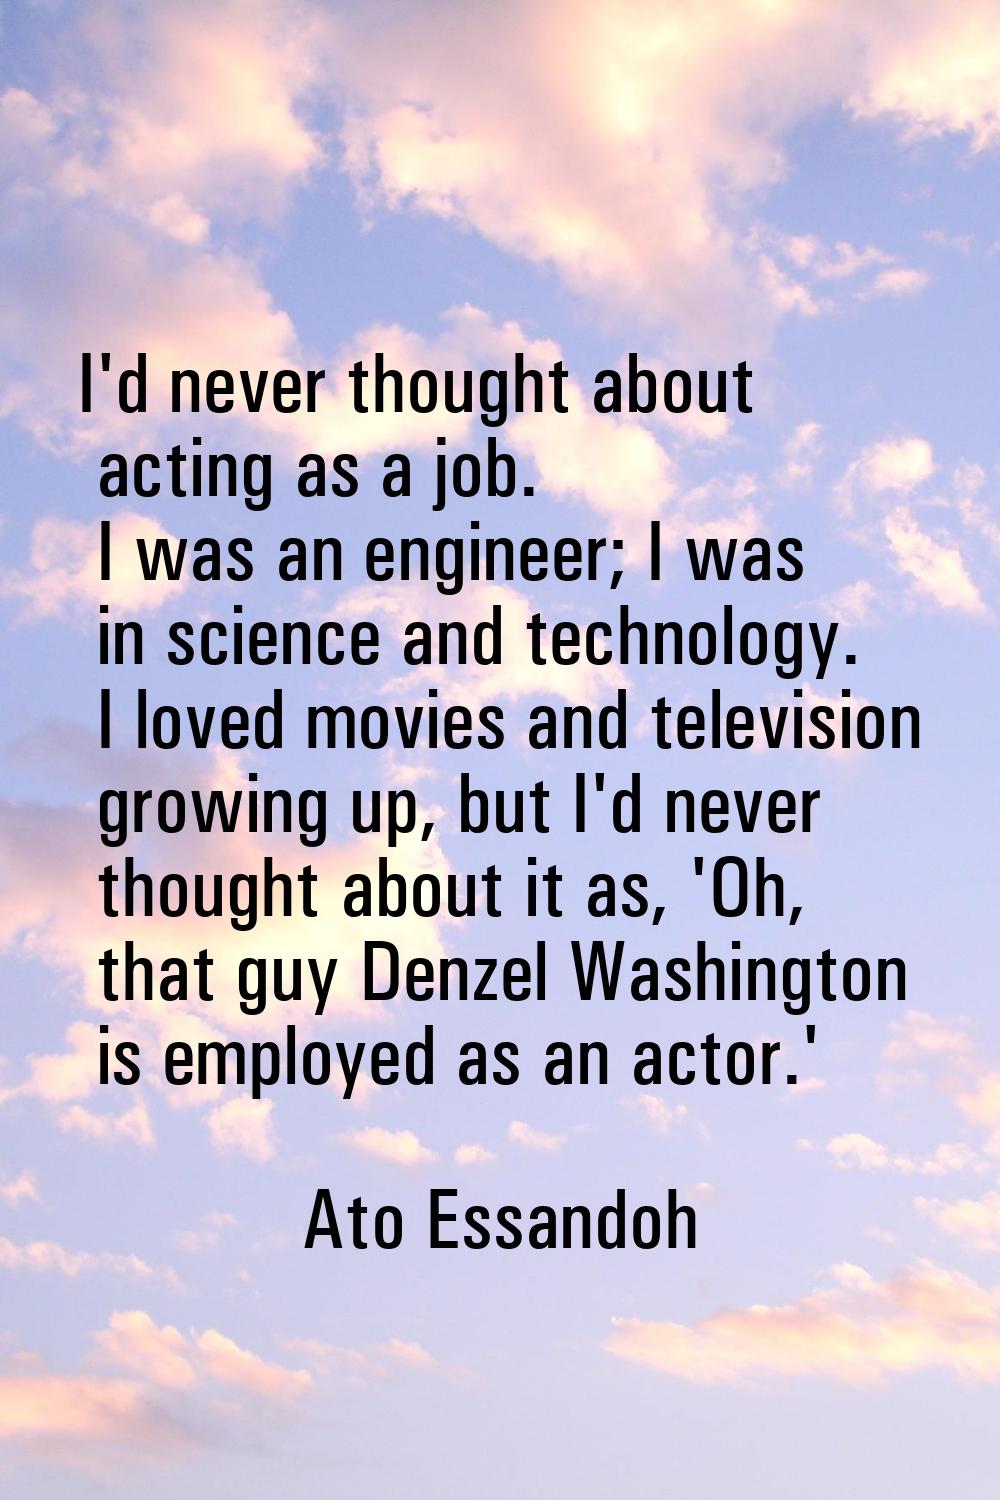 I'd never thought about acting as a job. I was an engineer; I was in science and technology. I love